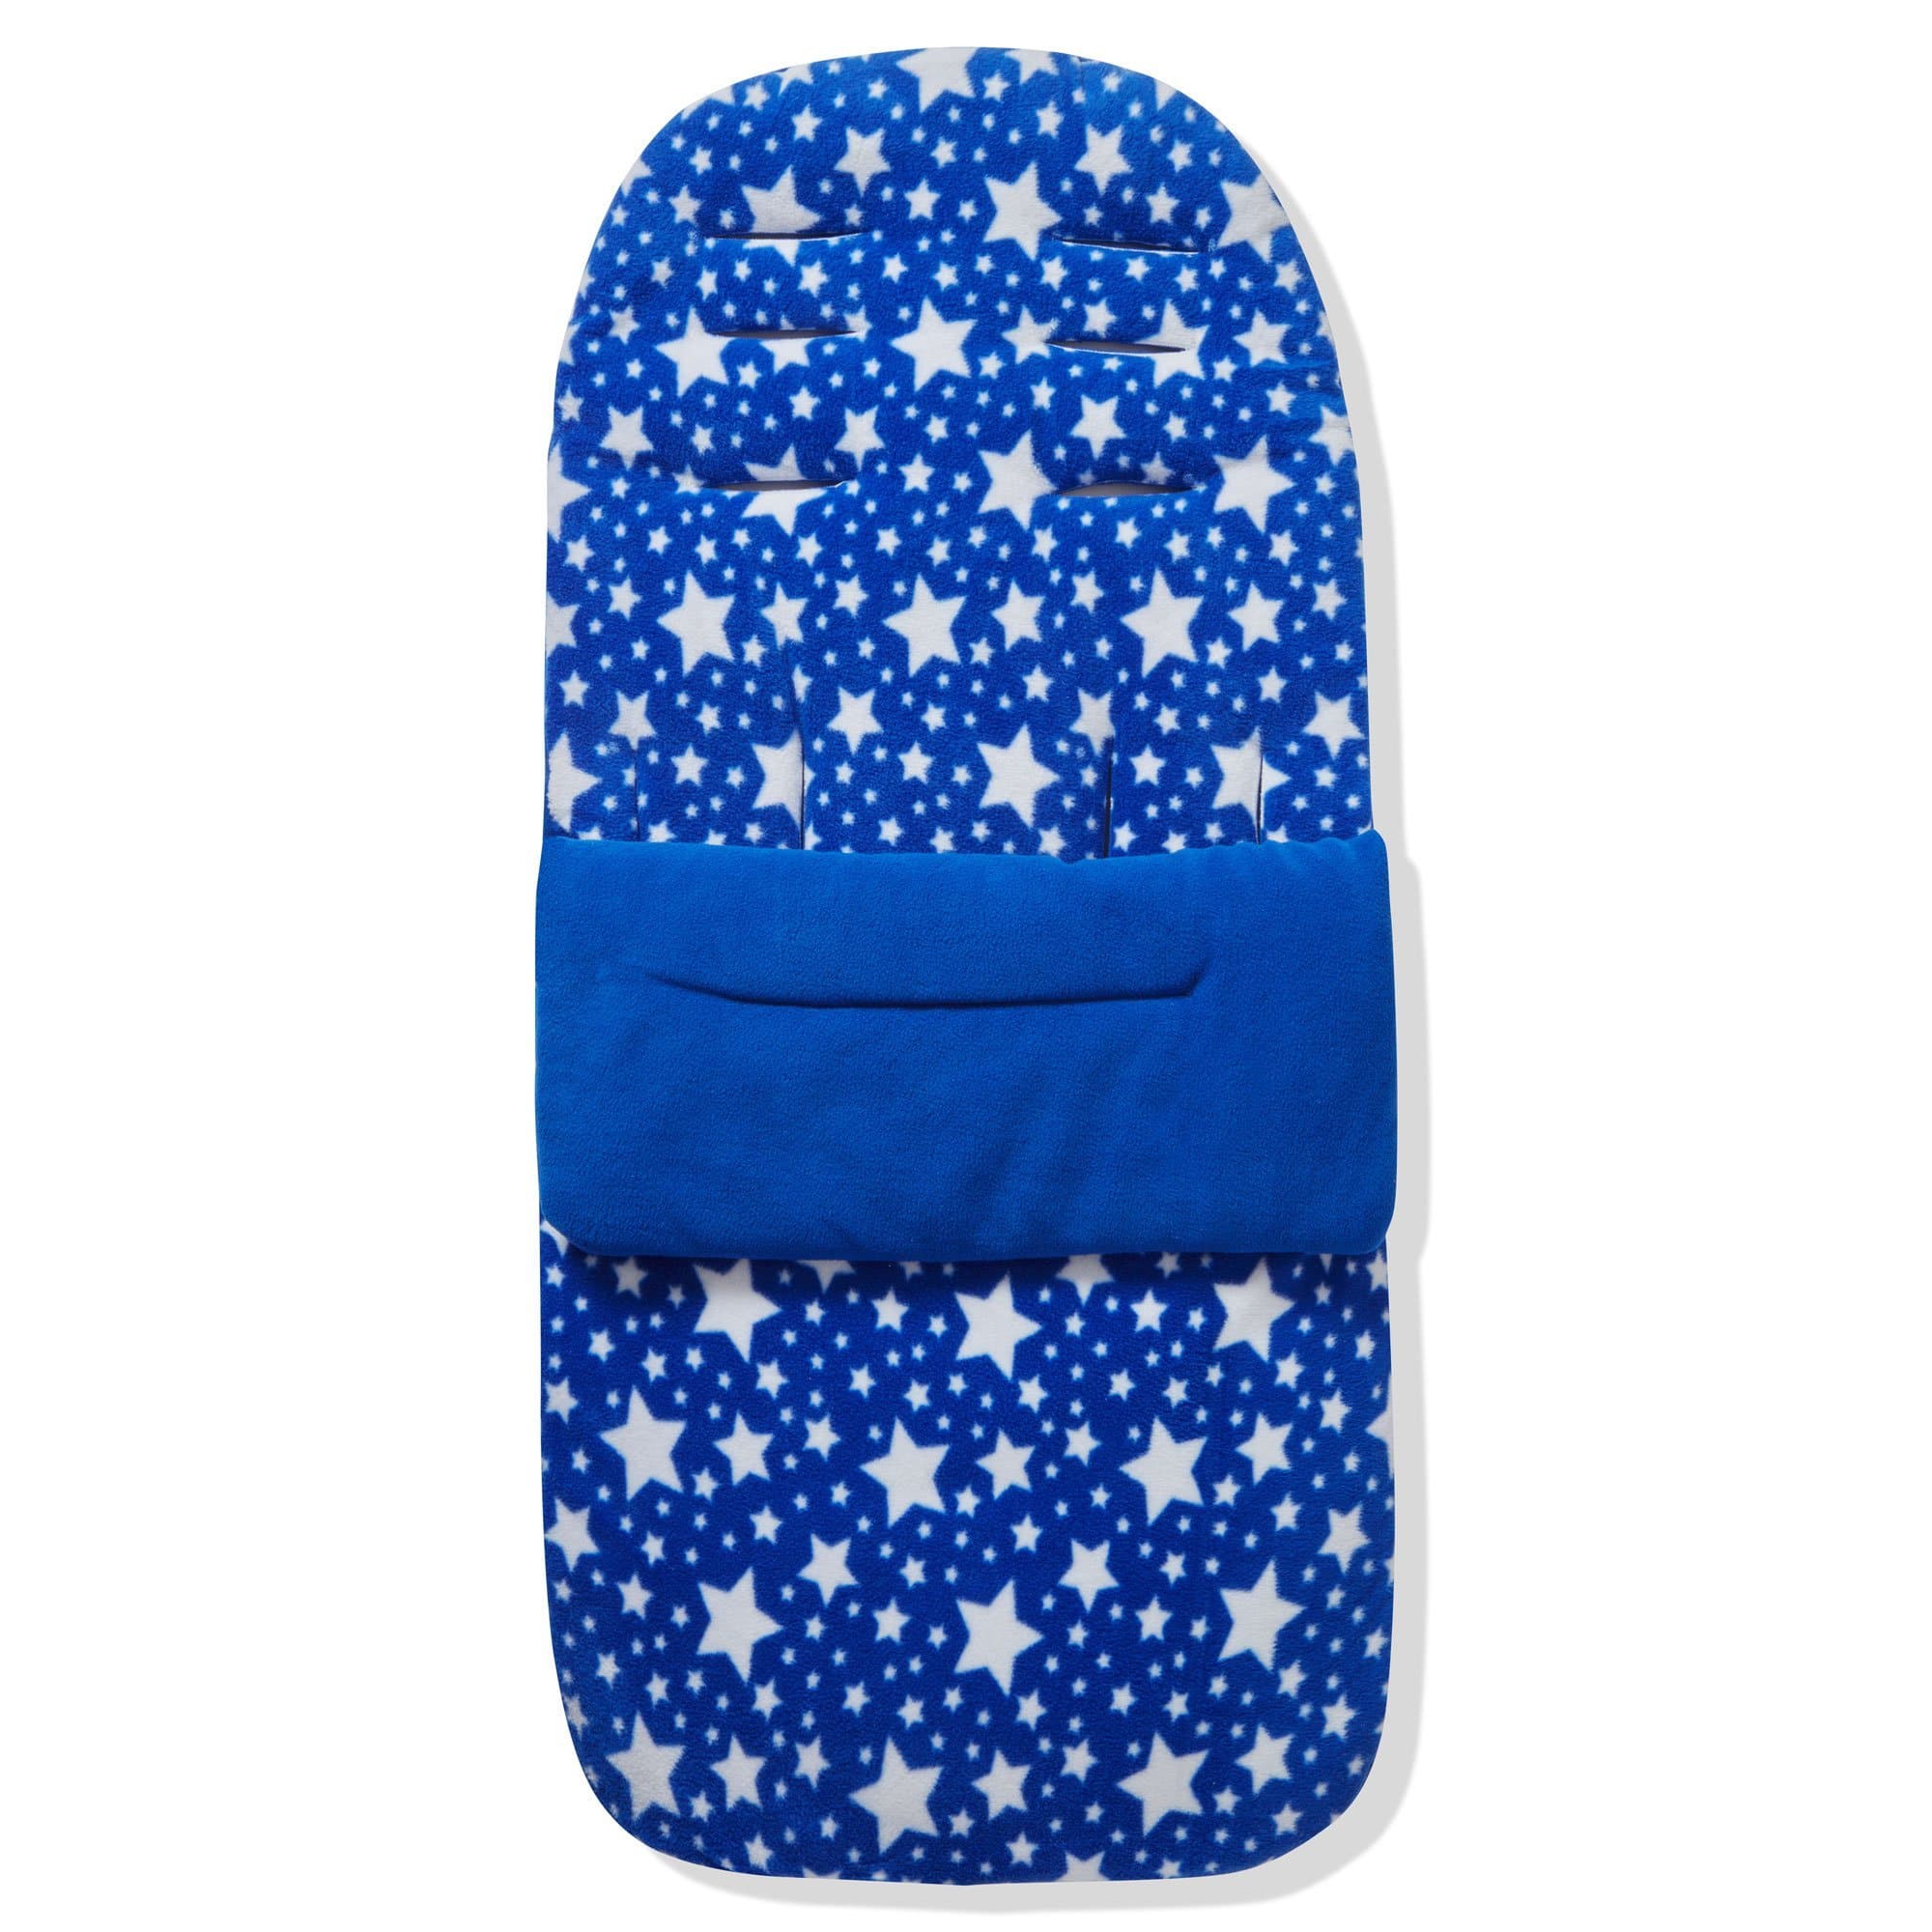 Fleece Footmuff / Cosy Toes Compatible with BOB - Blue Star / Fits All Models | For Your Little One